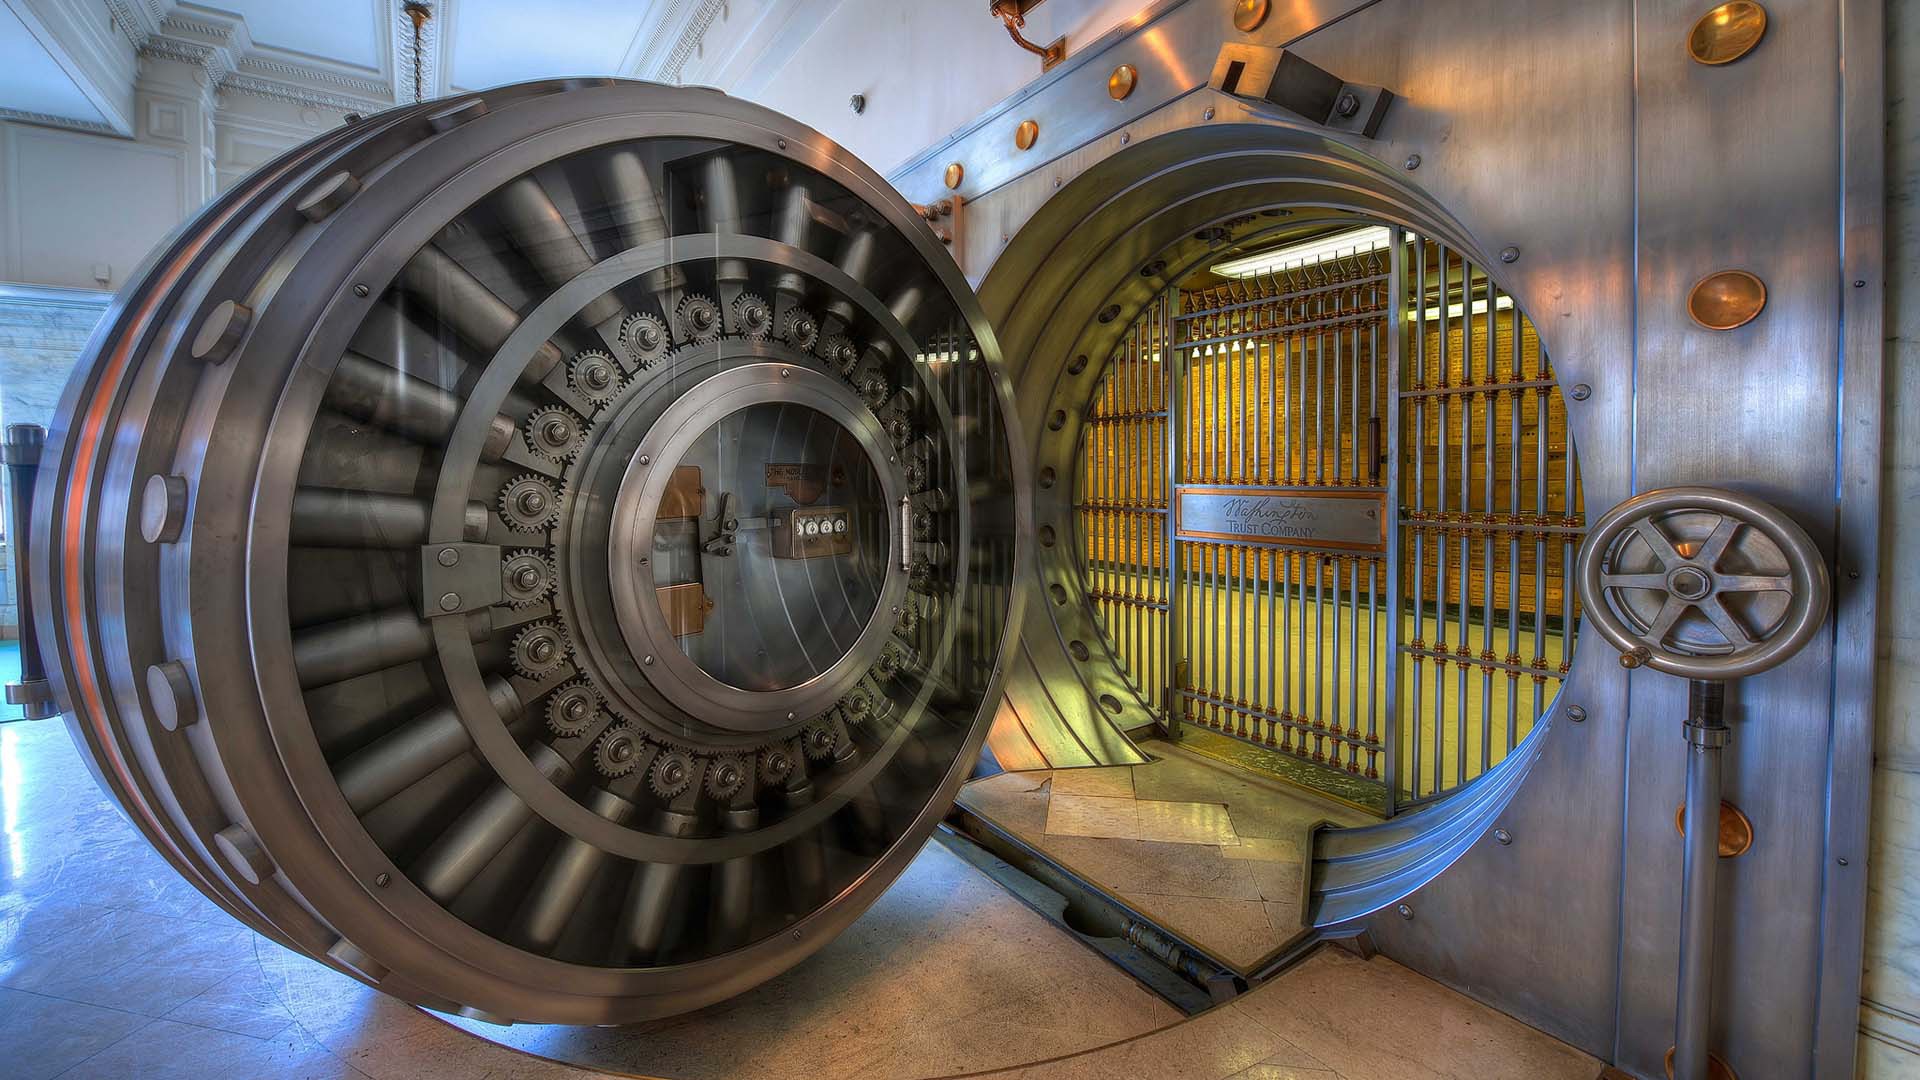 fascinating photos - fort knox security